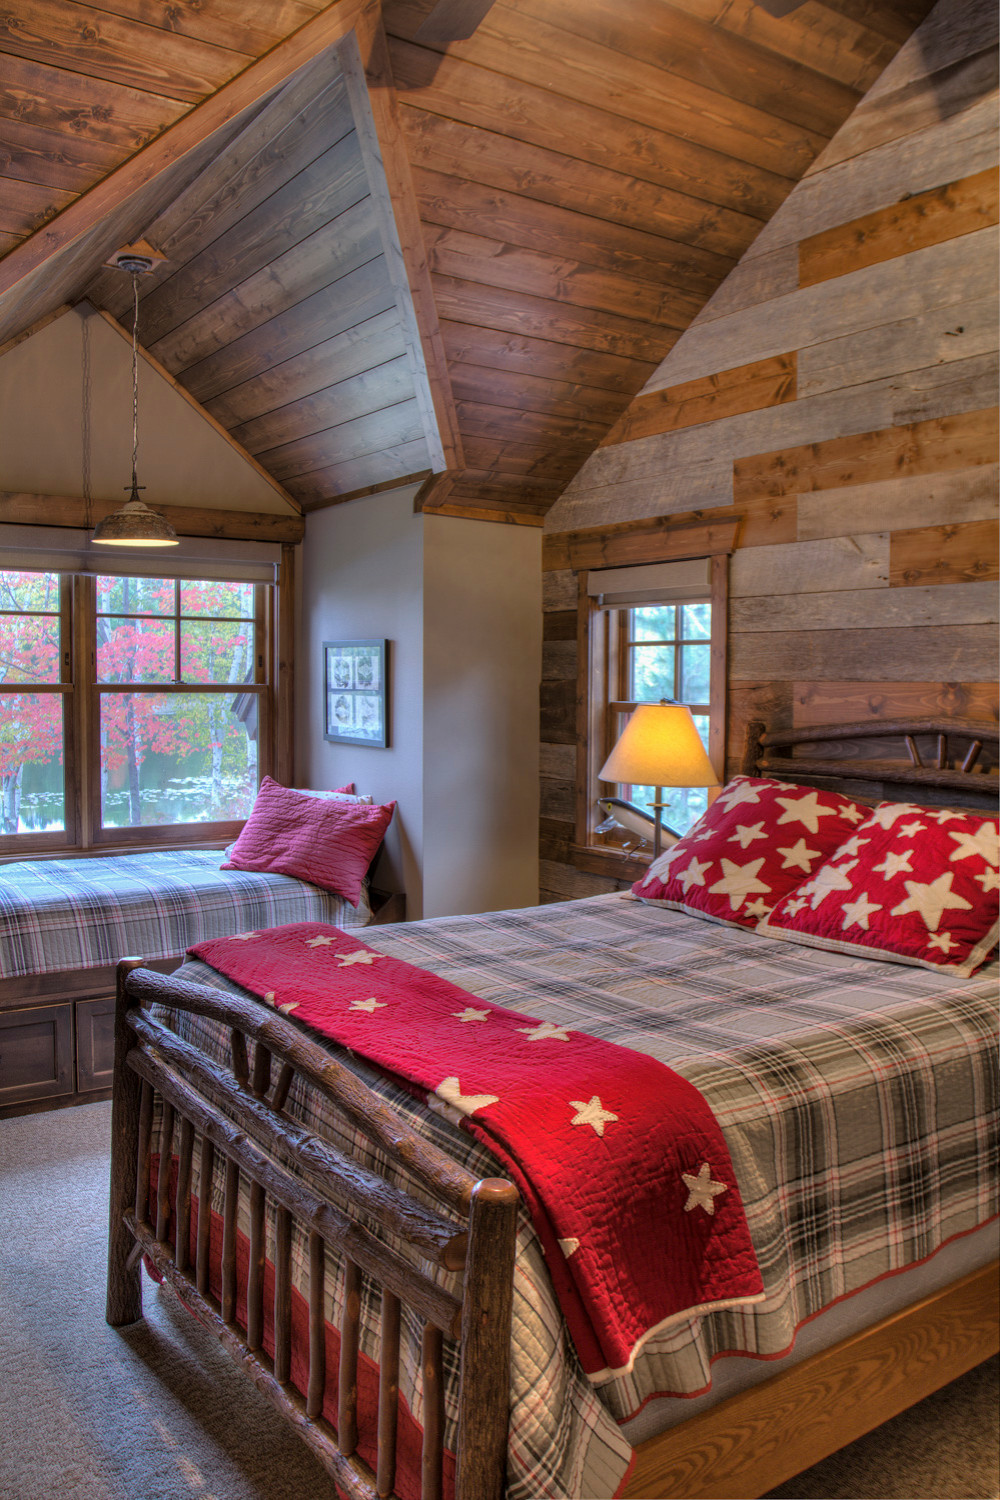 Cabin-style-bedroom-with-colorful-bedding-that-adds-much-more-than-just-bright-hues-69490